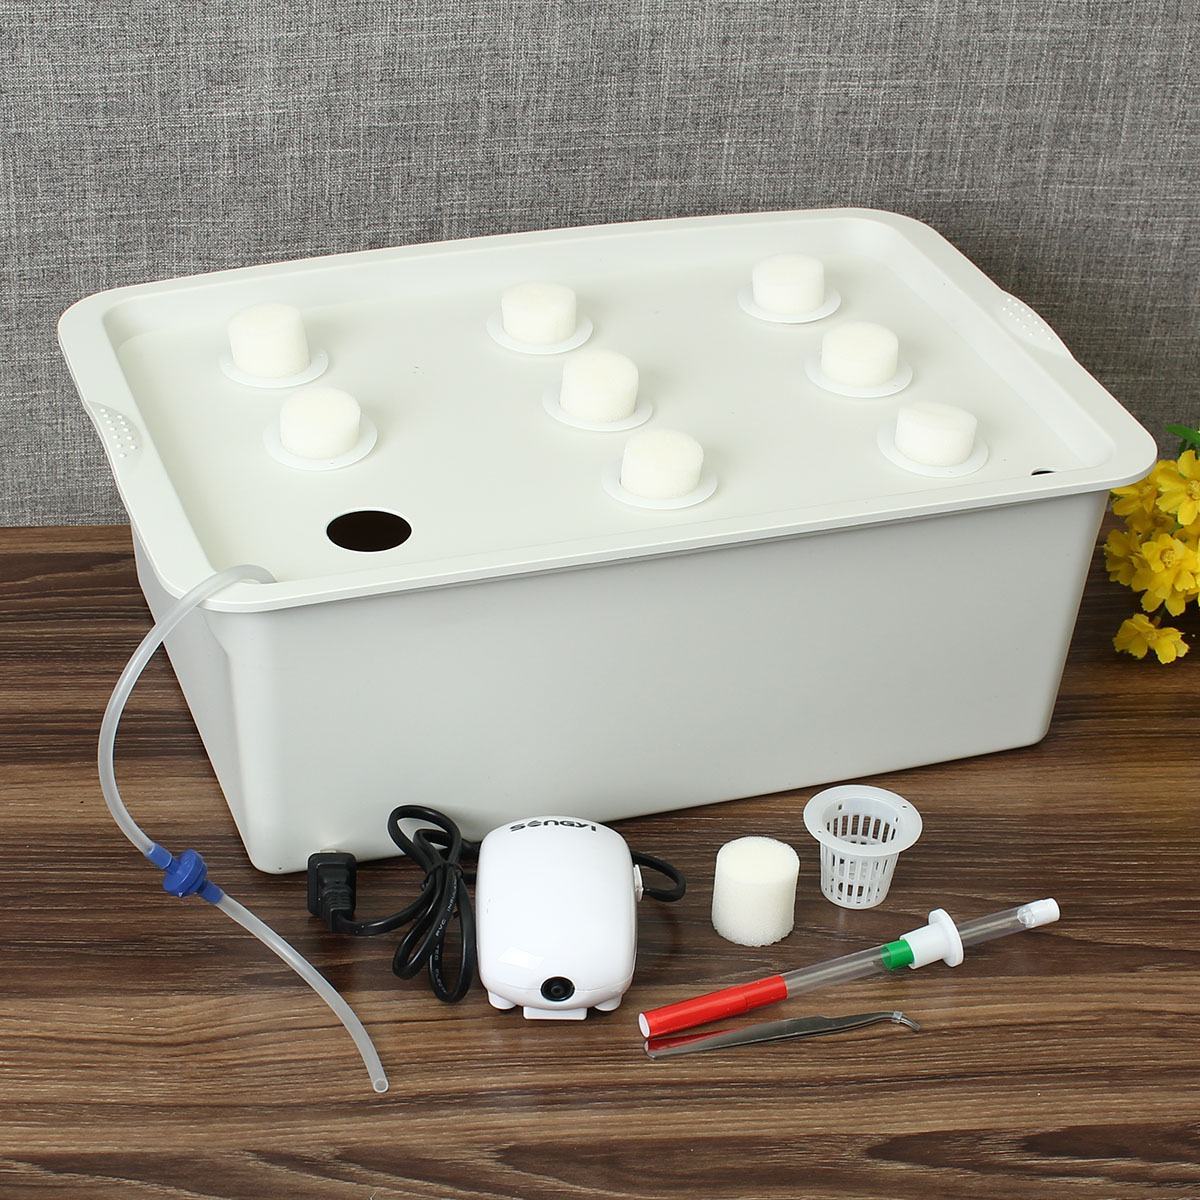 220V-Hydroponic-Grow-Box-9-Holes-DWC-Indoor-Aerobic-Soilless-Cultivation-System-Kit-Water-Planting-1190827-2